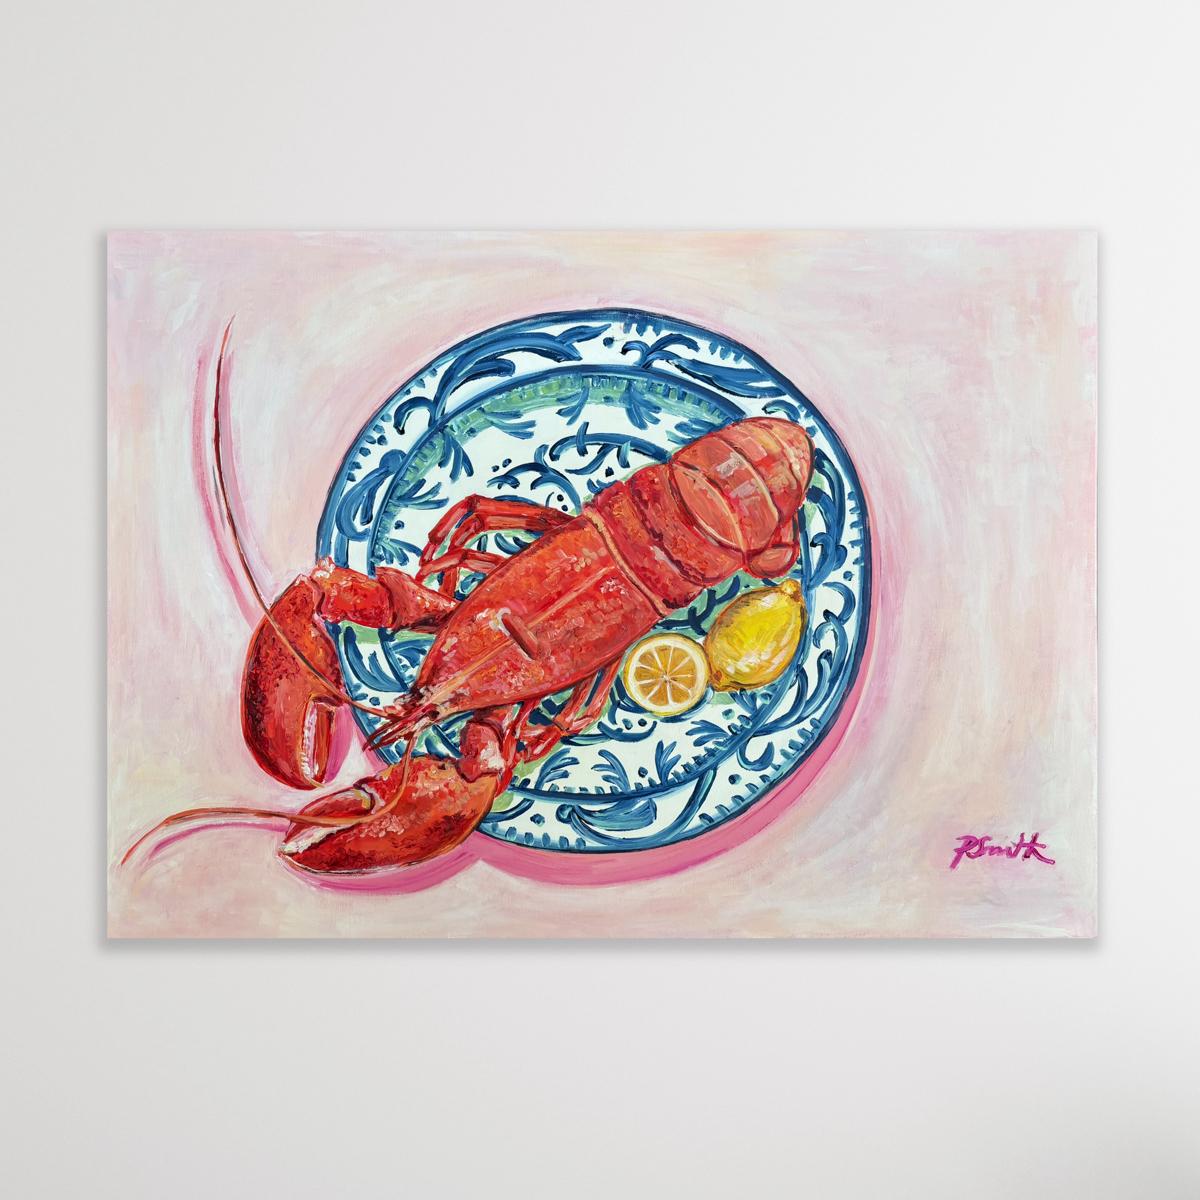 Large Lobster on Blue & White Plate, Original painting, Food art, Seafood - Painting by Pippa Smith